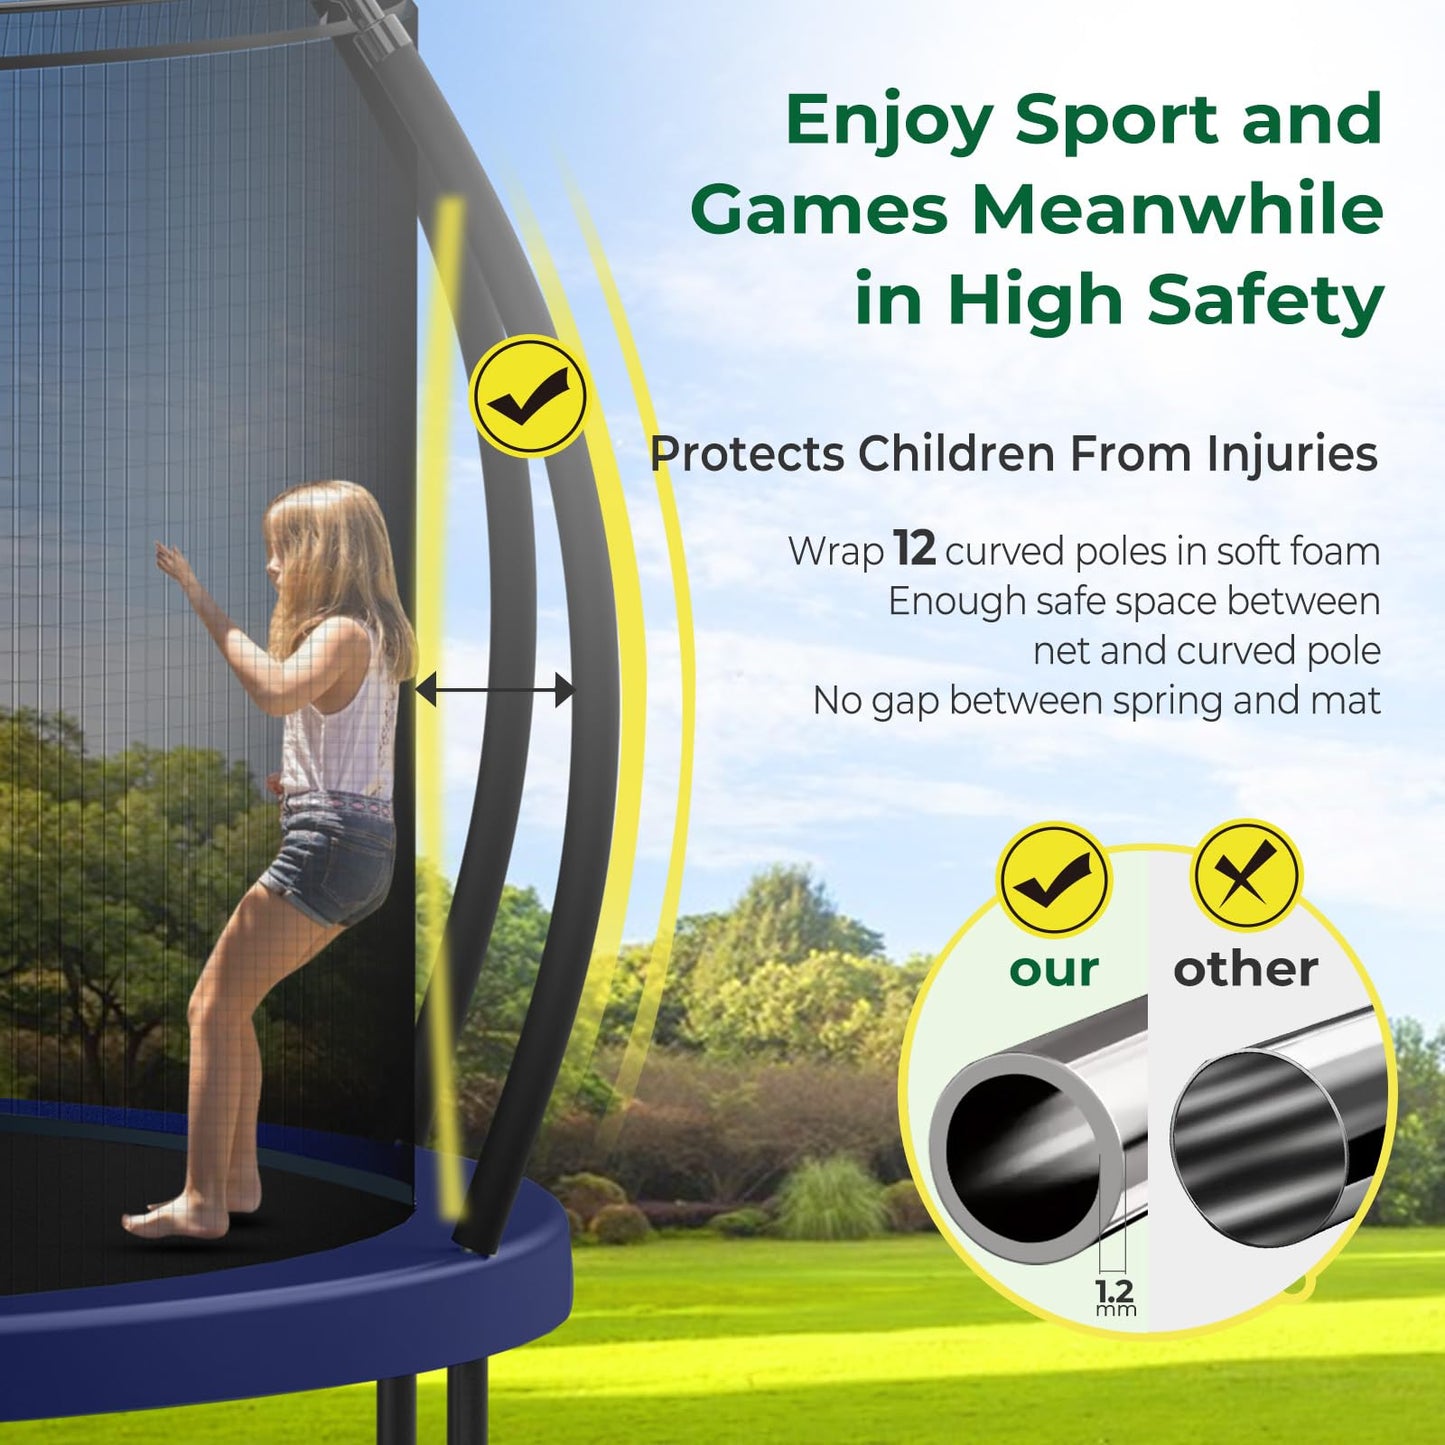 Trampoline for Kids & Adults